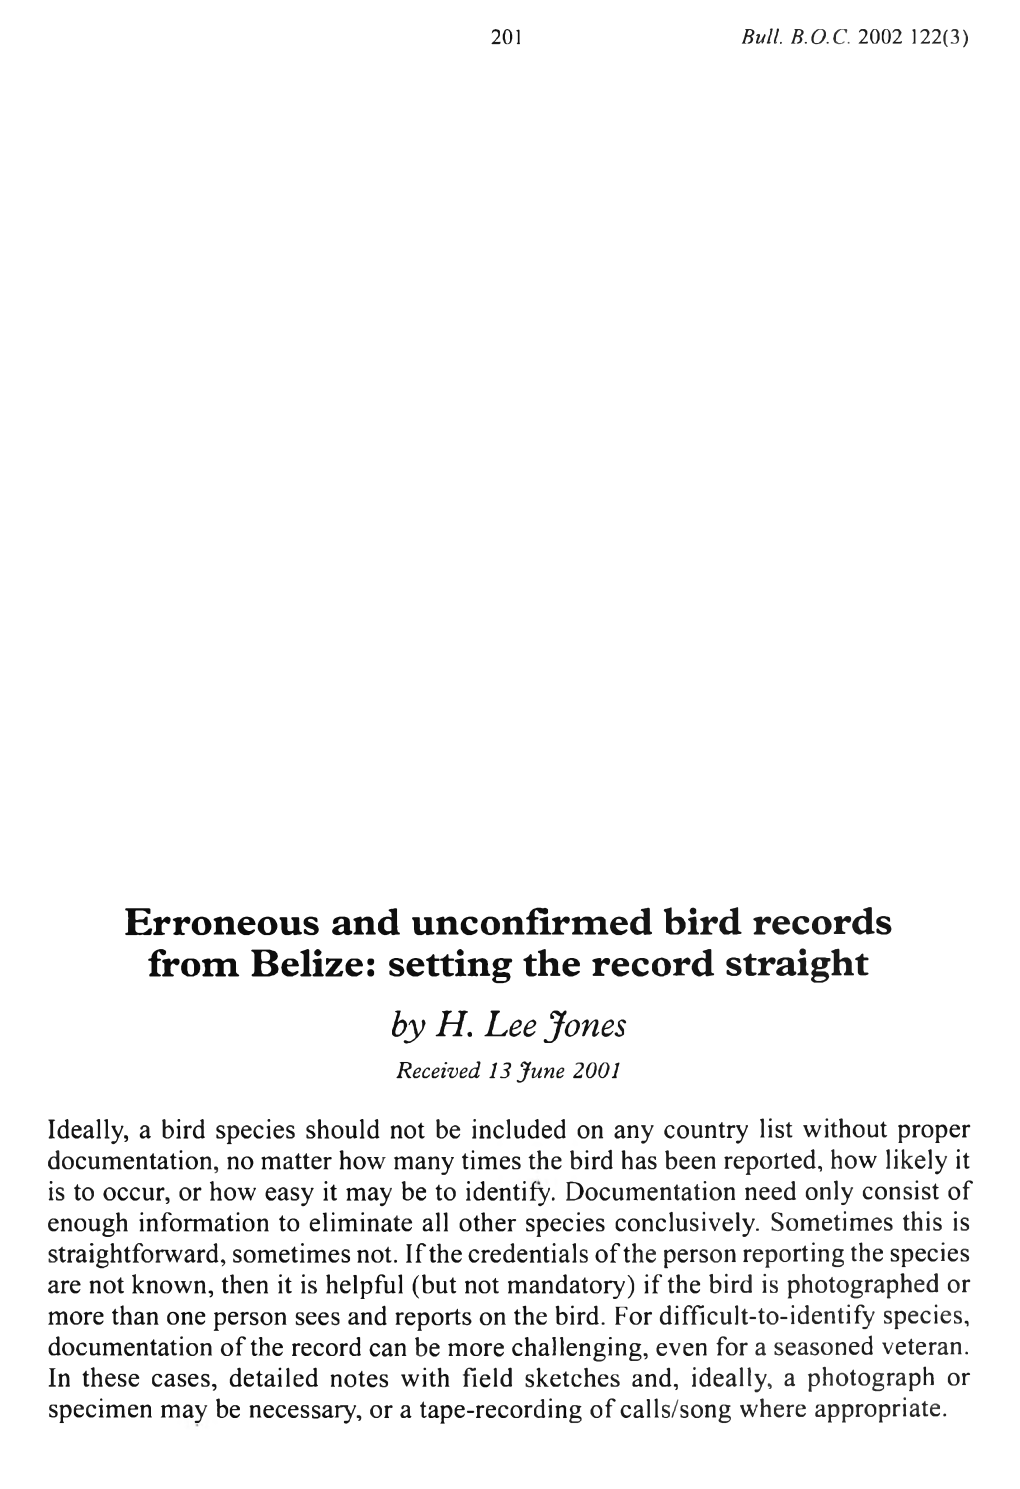 Erroneous and Unconfirmed Bird Records from Belize: Setting the Record Straight